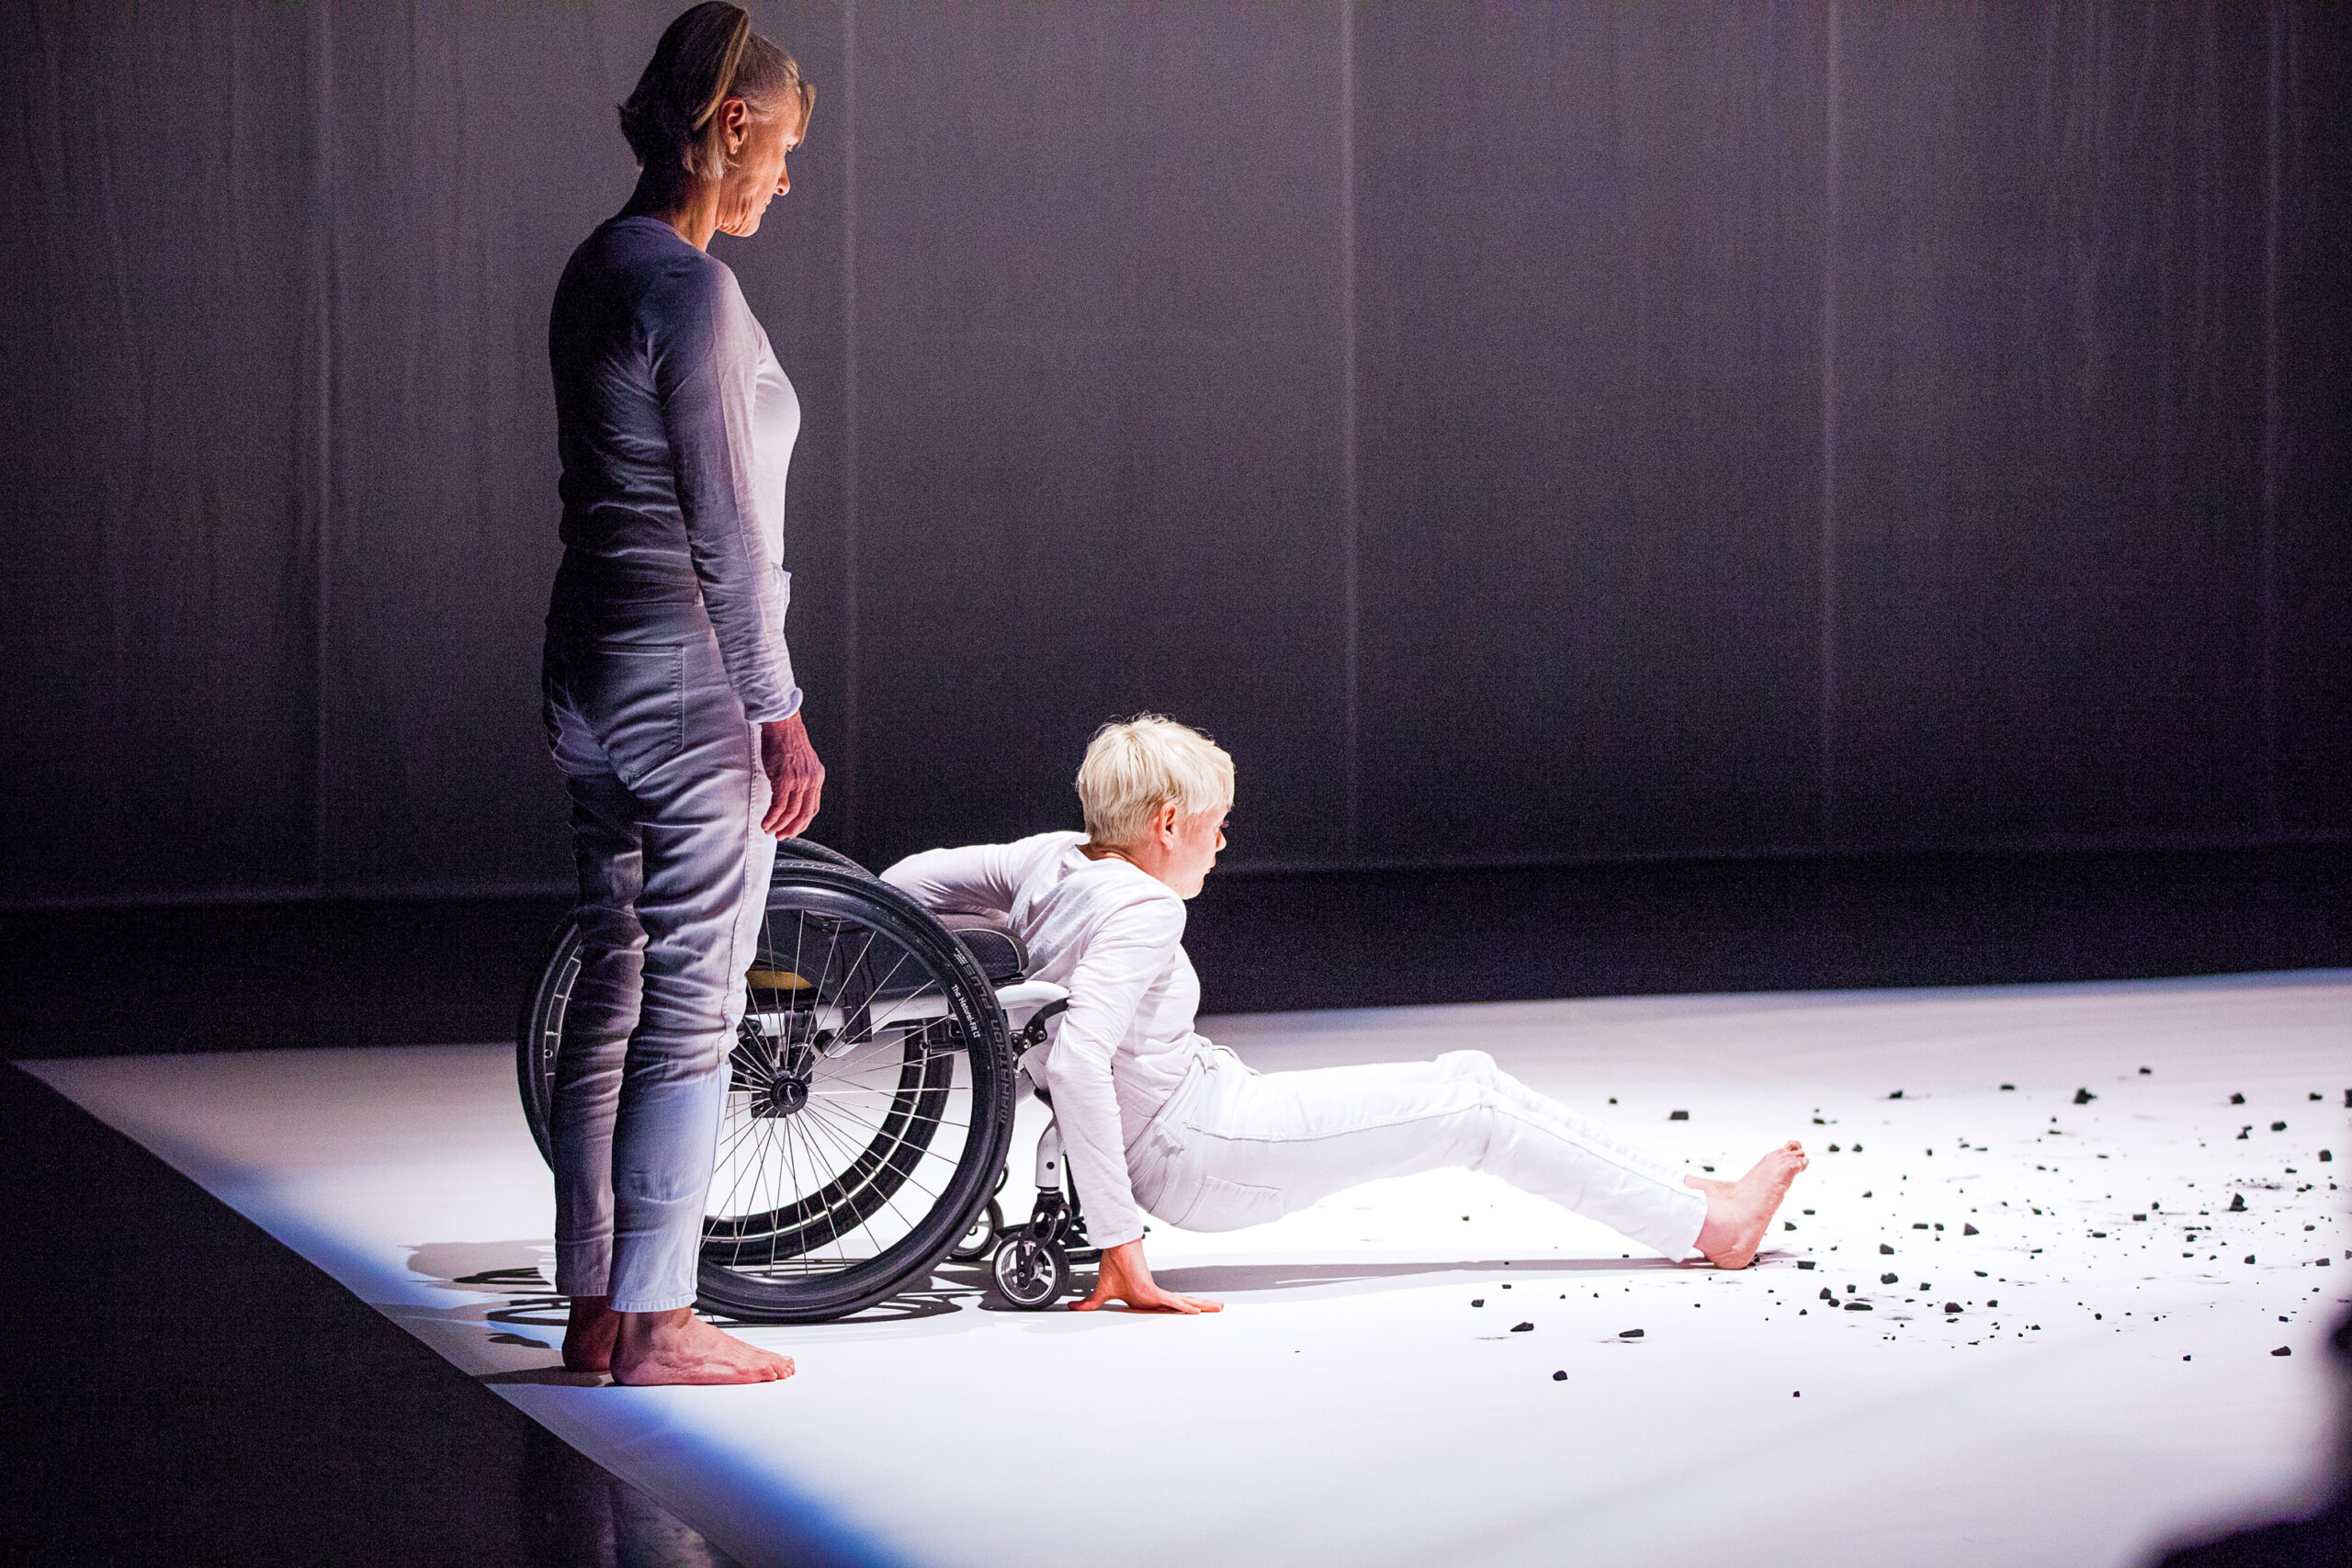 Dance educator Nina Martin with a wheelchair dancer performing on stage.